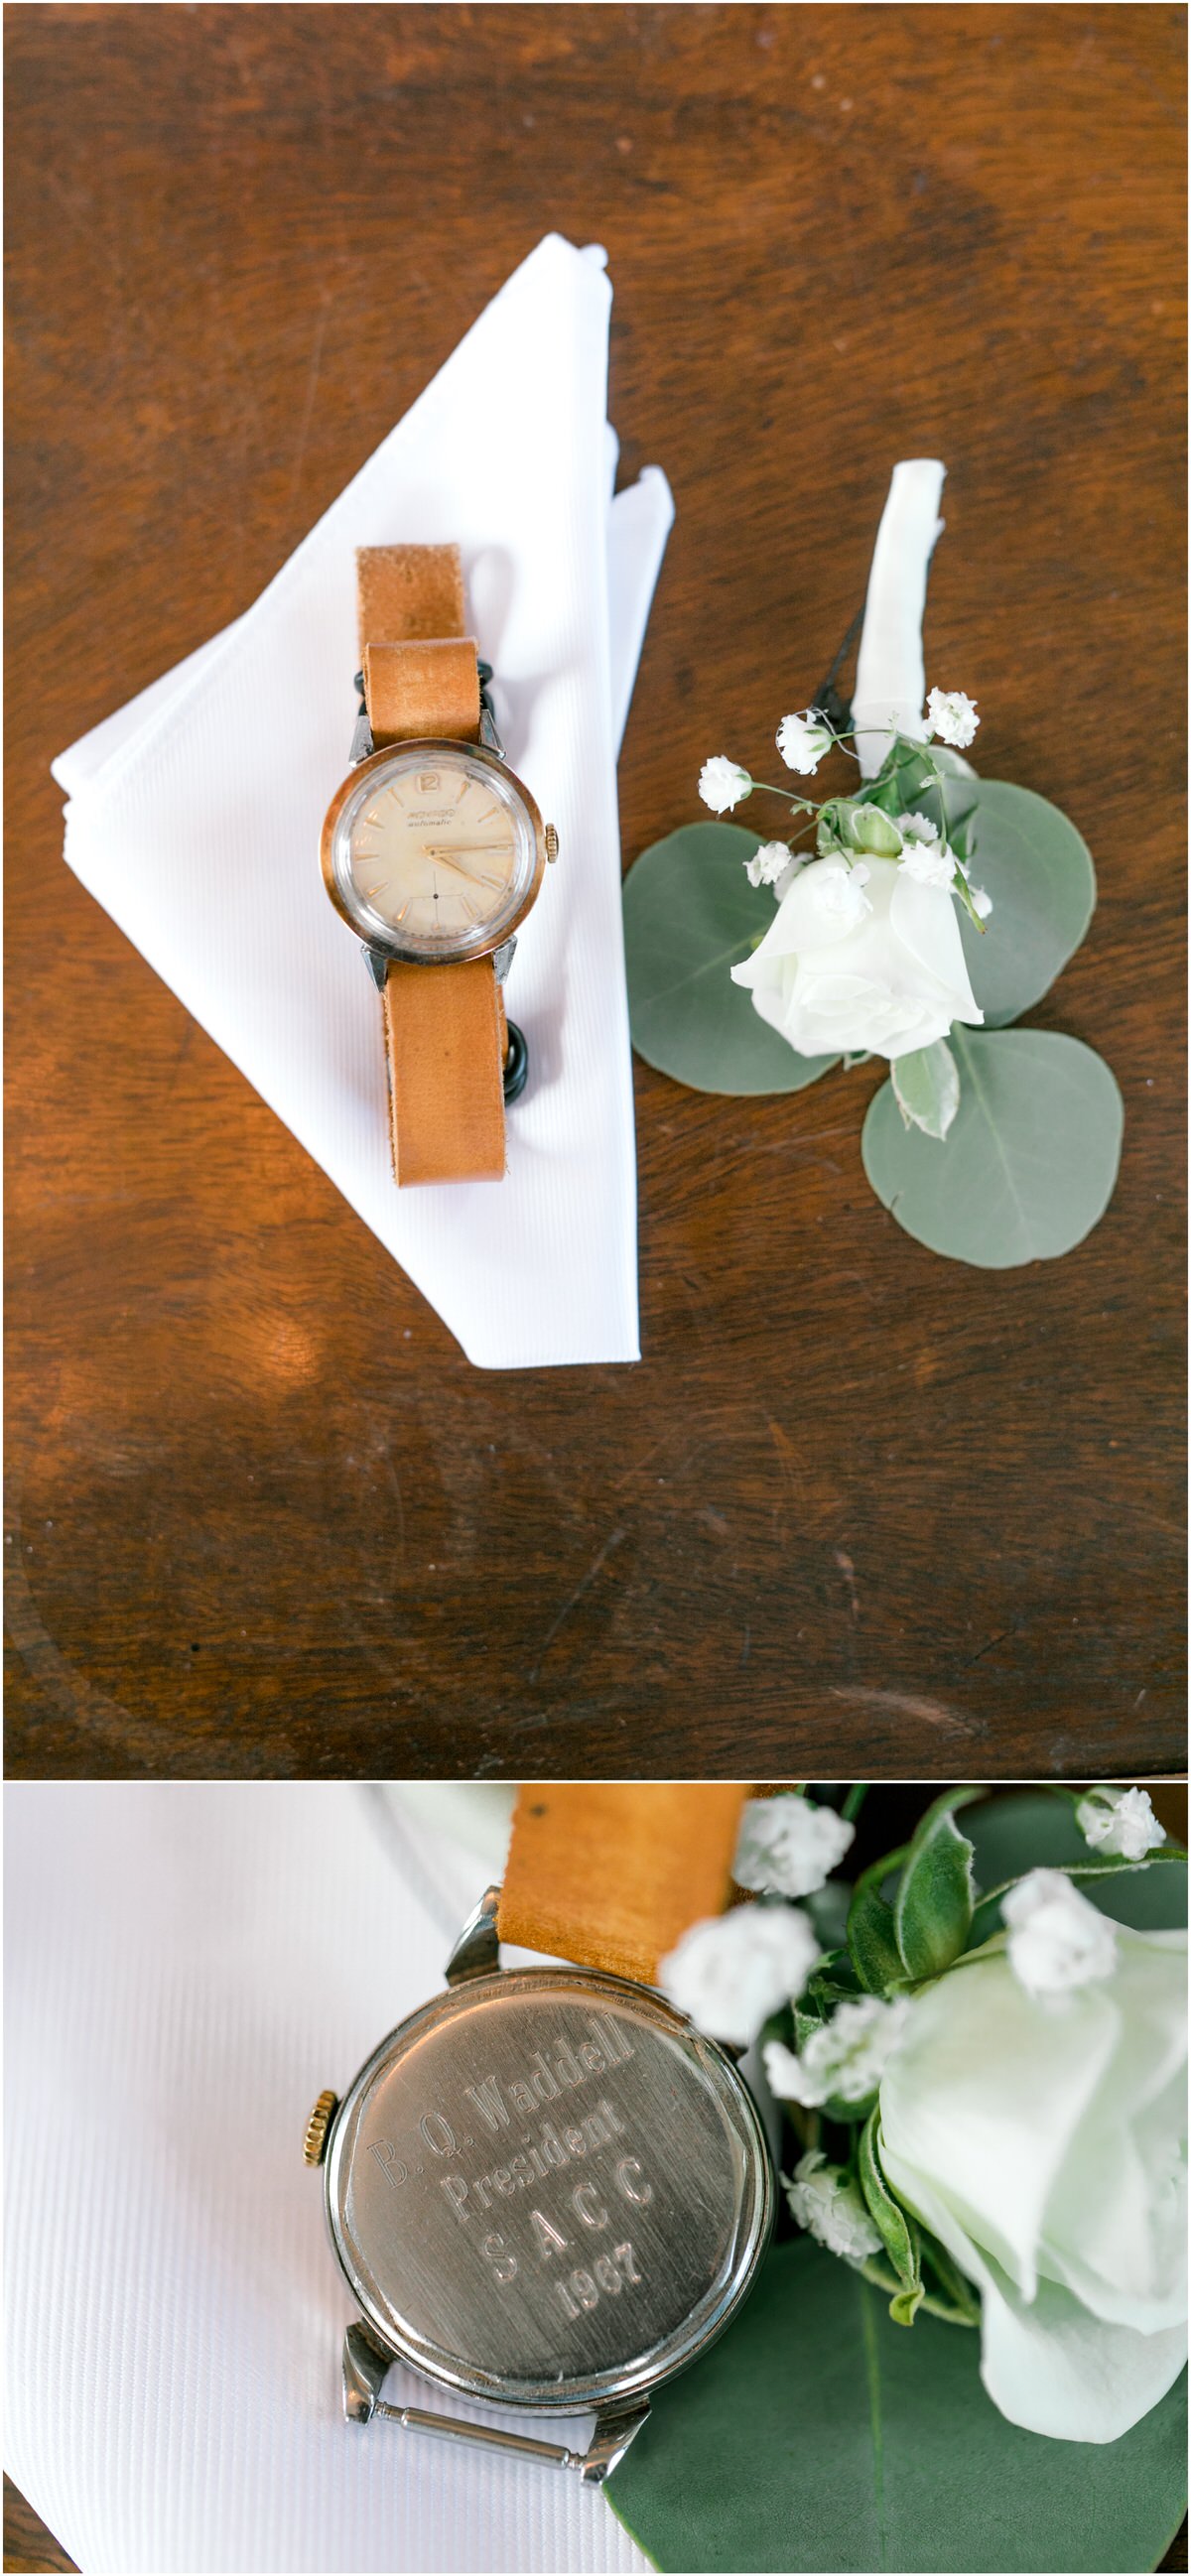 Antique watch and white flower